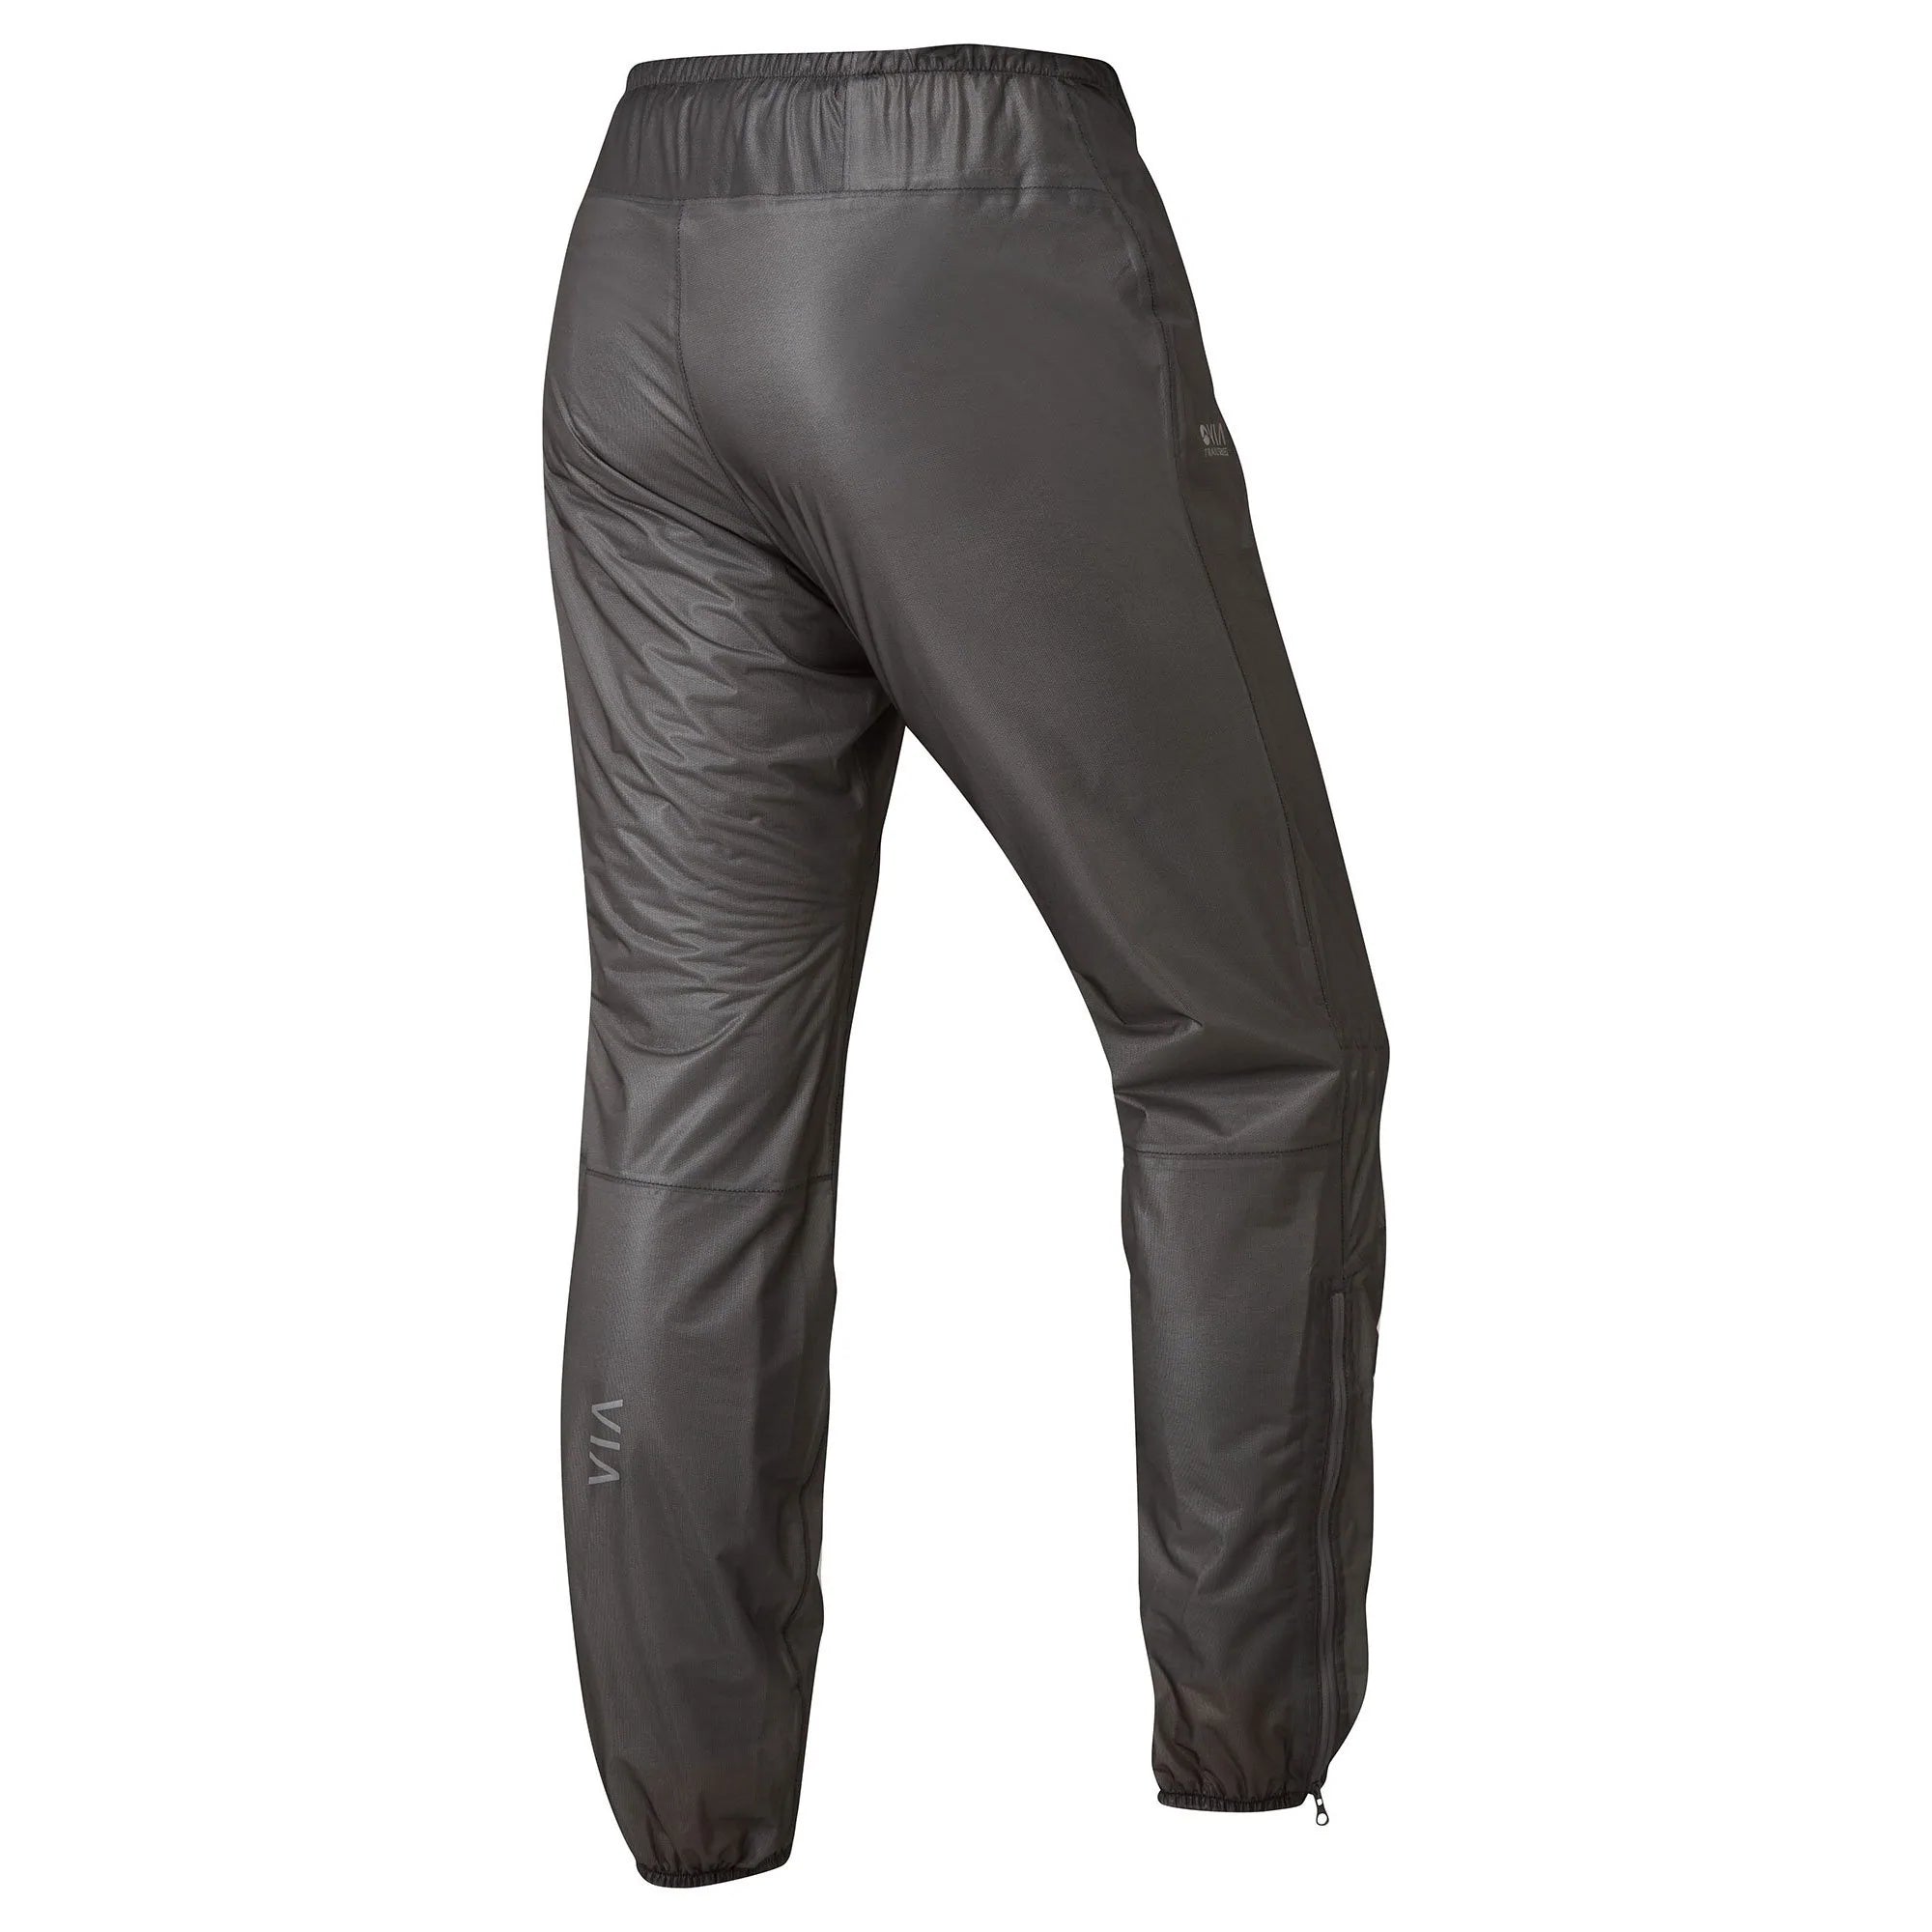 Thunder Pant Women's Waterproof Overtrousers